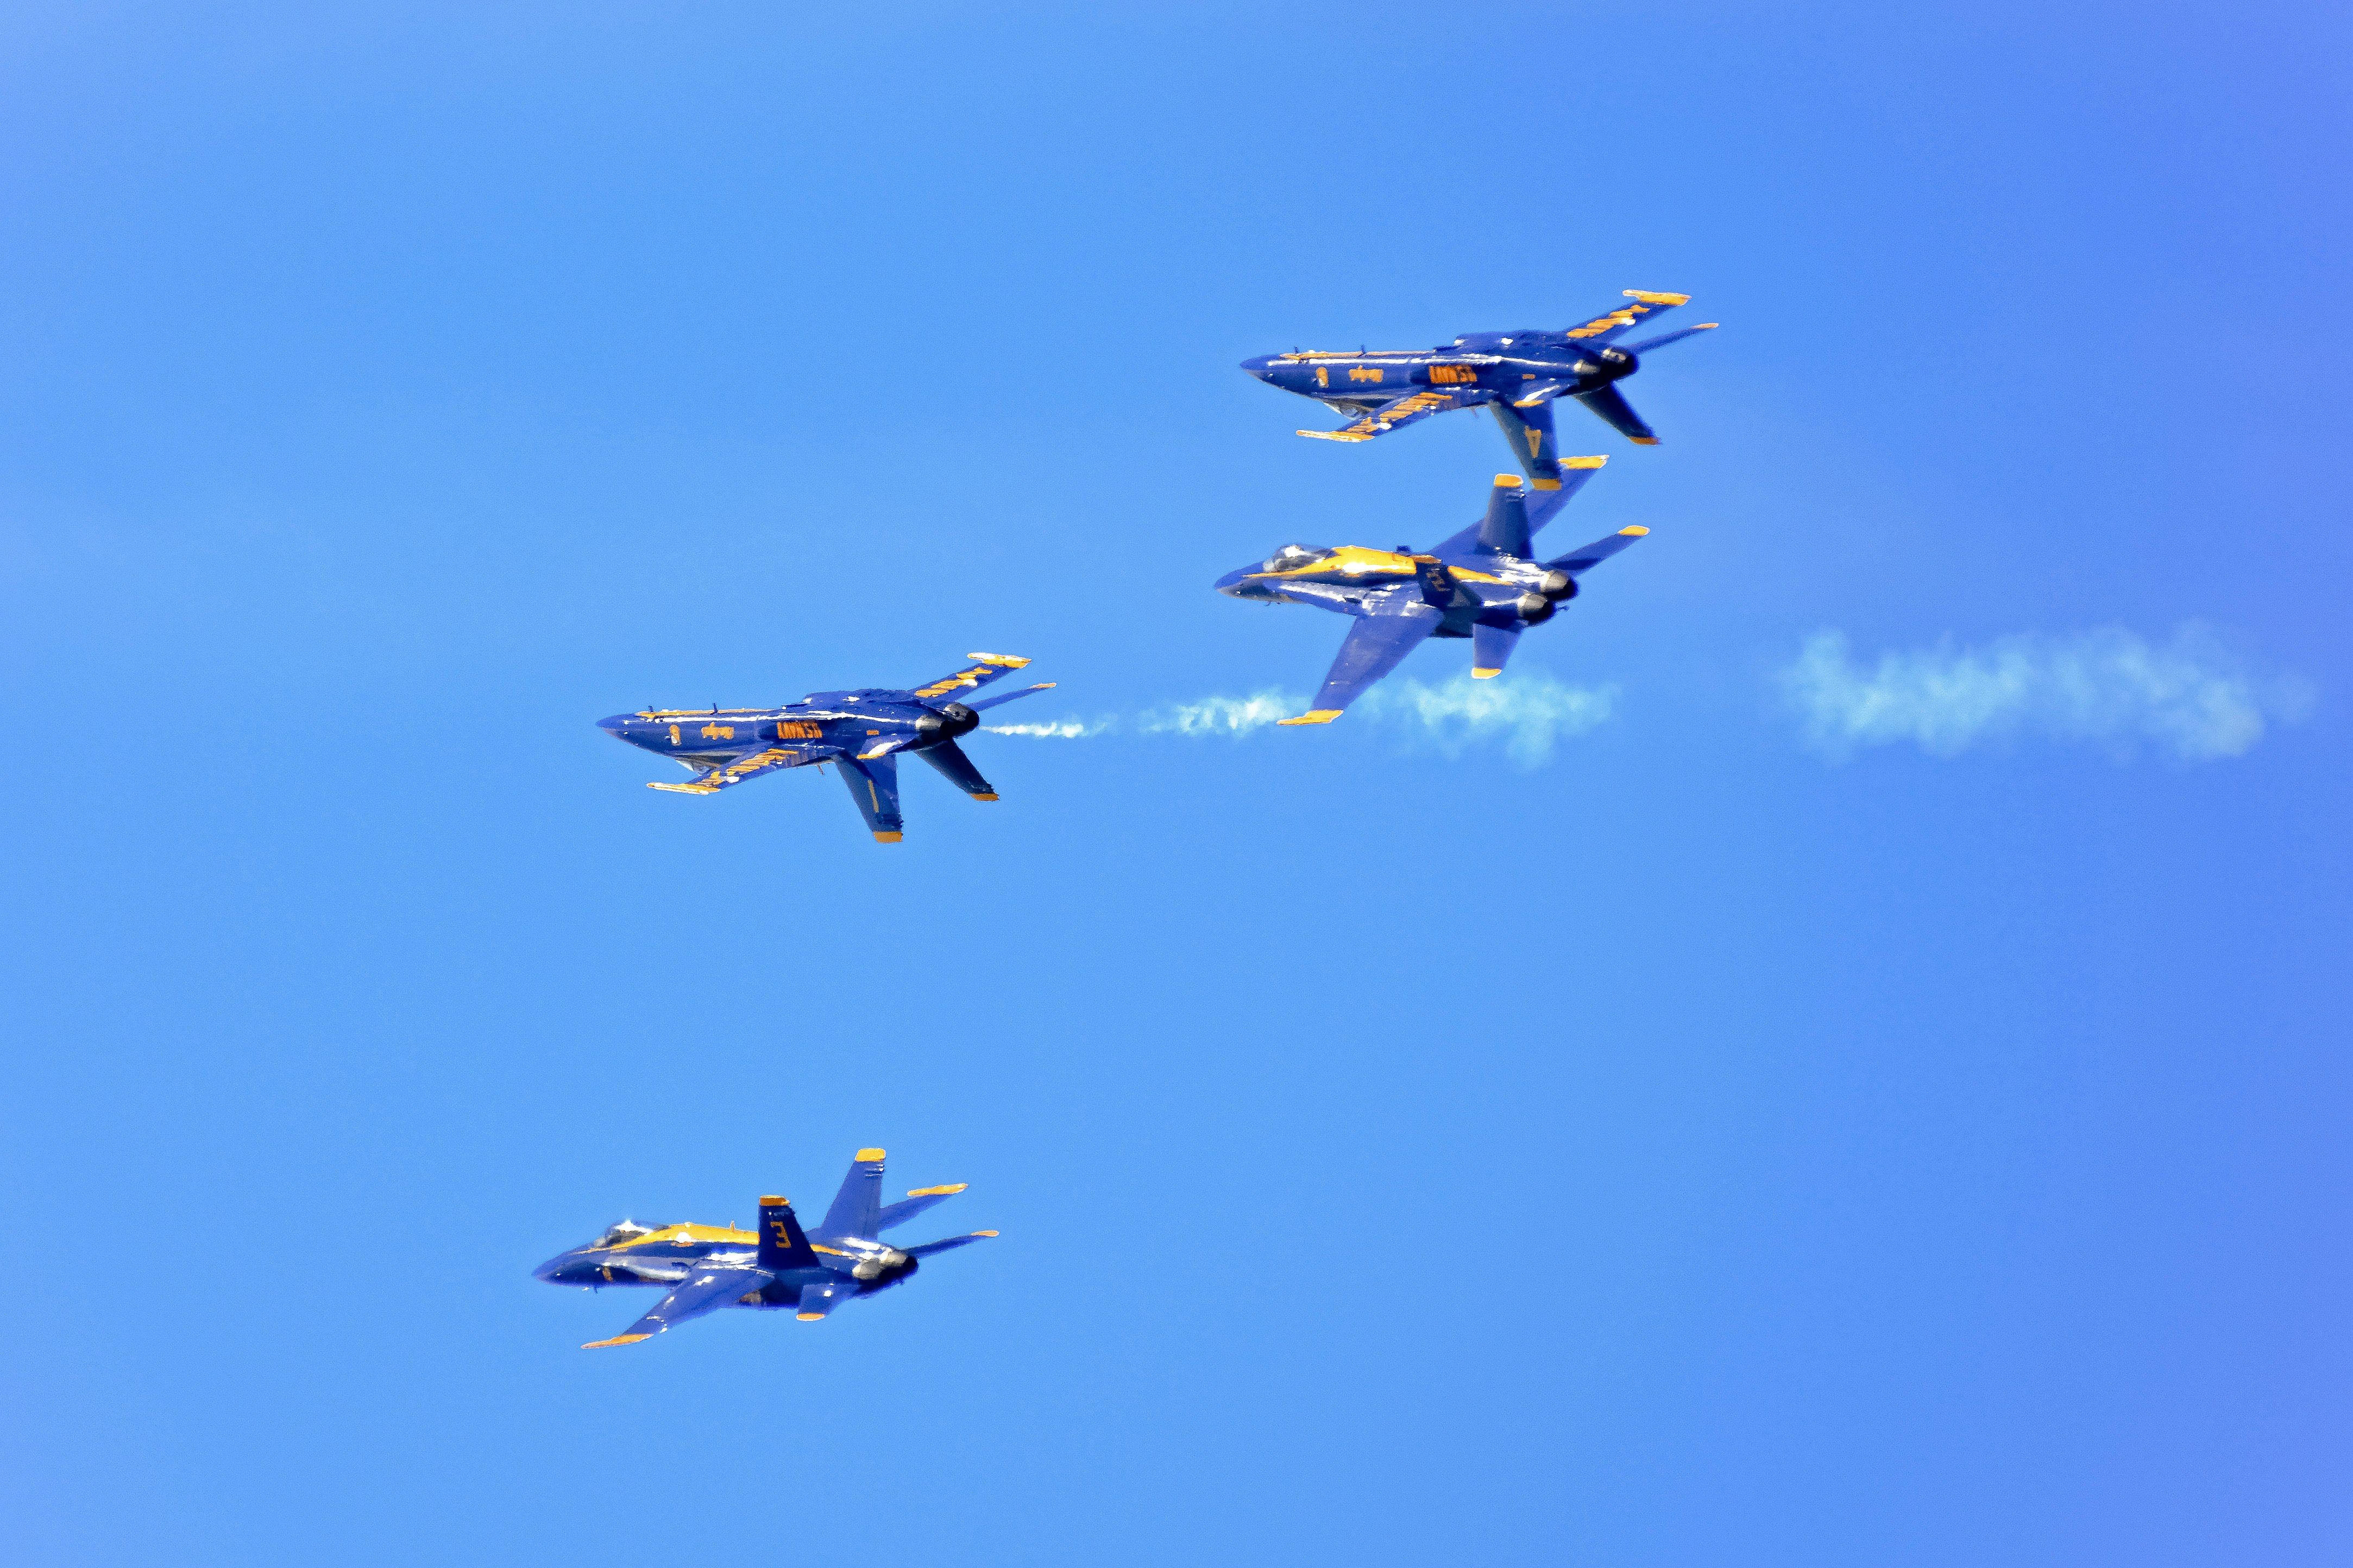 four fighter planes in mid air during daytime